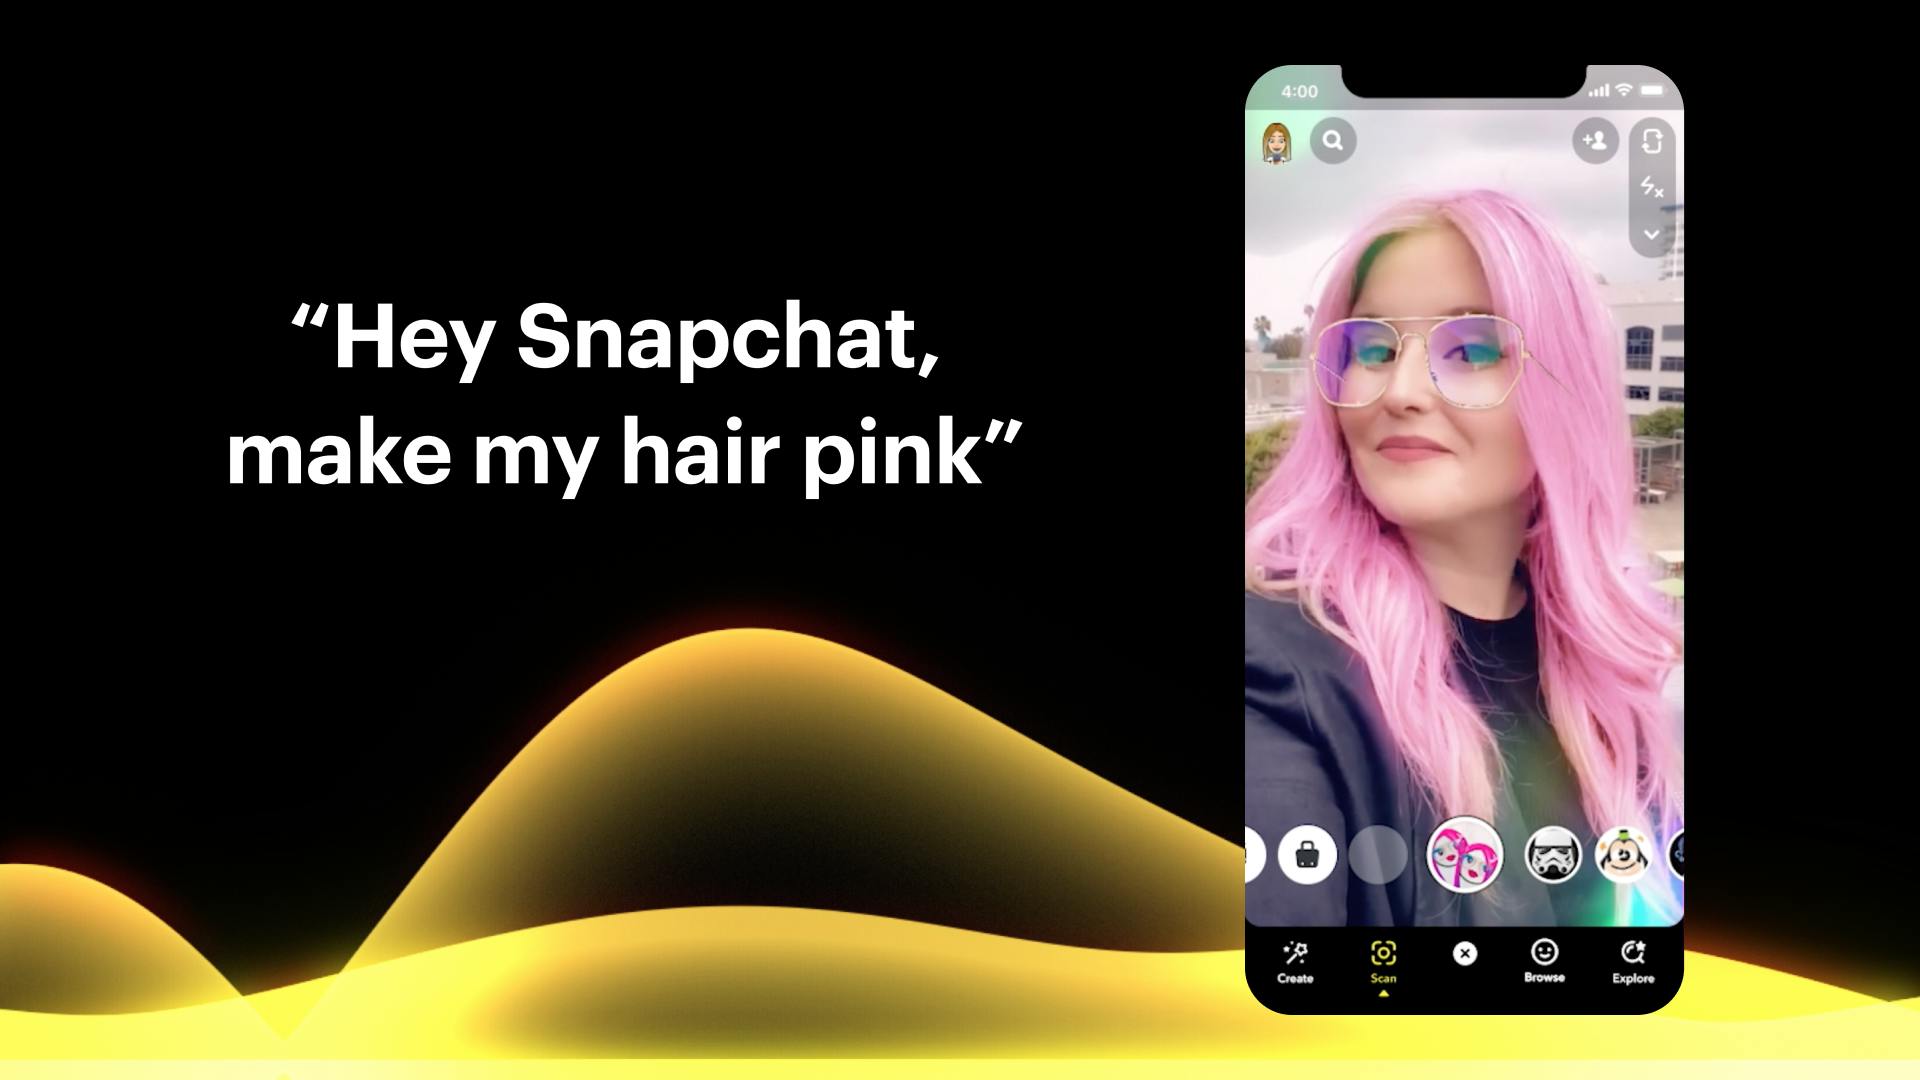 Hey Snapchat, make my hair pink. Selfie with a woman with pink hair.